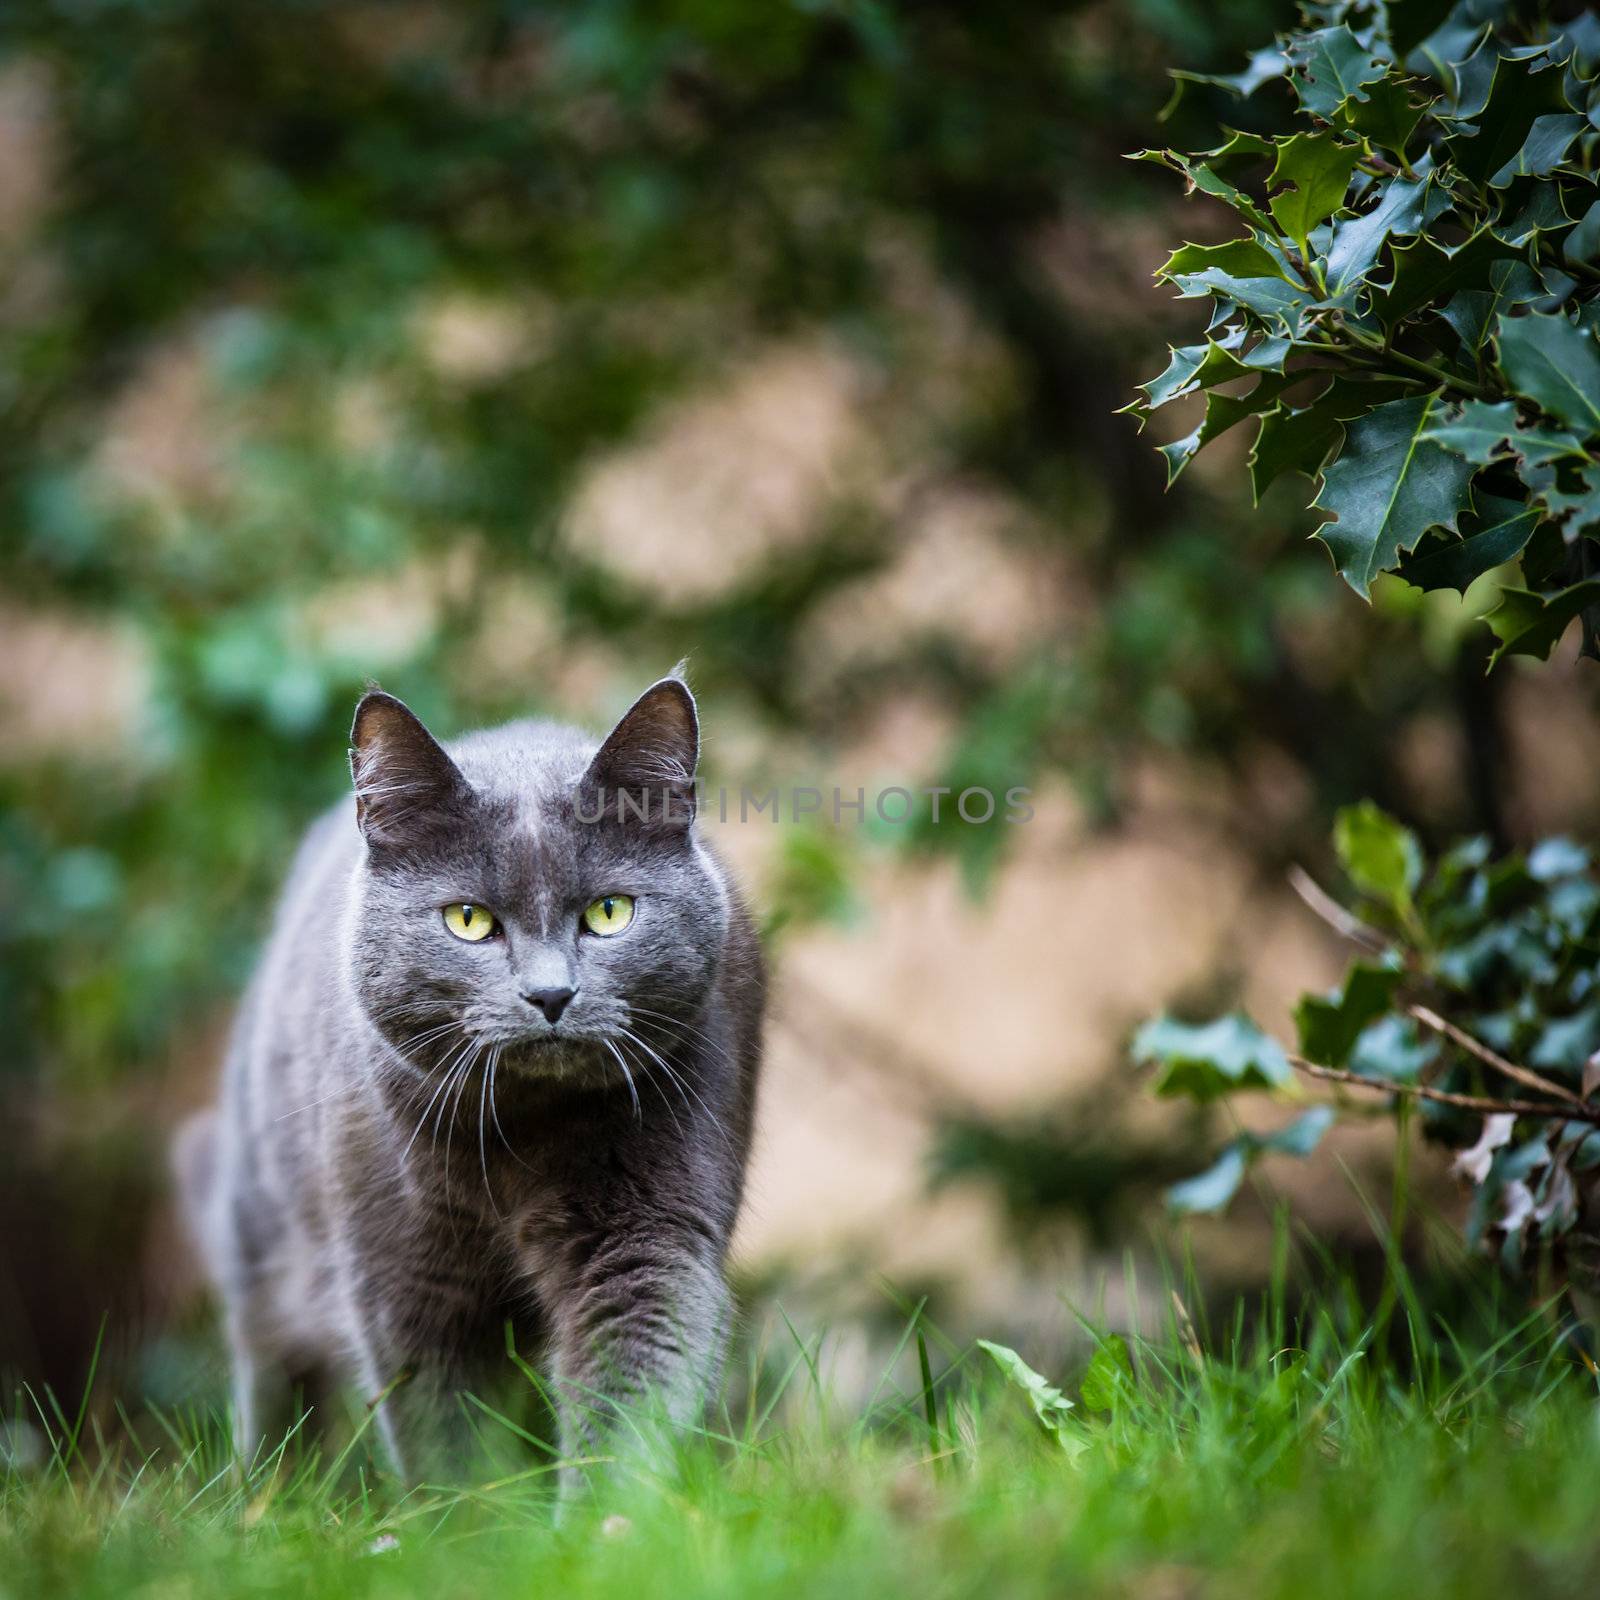 Cat outdoors on a green lawn, walking towards you